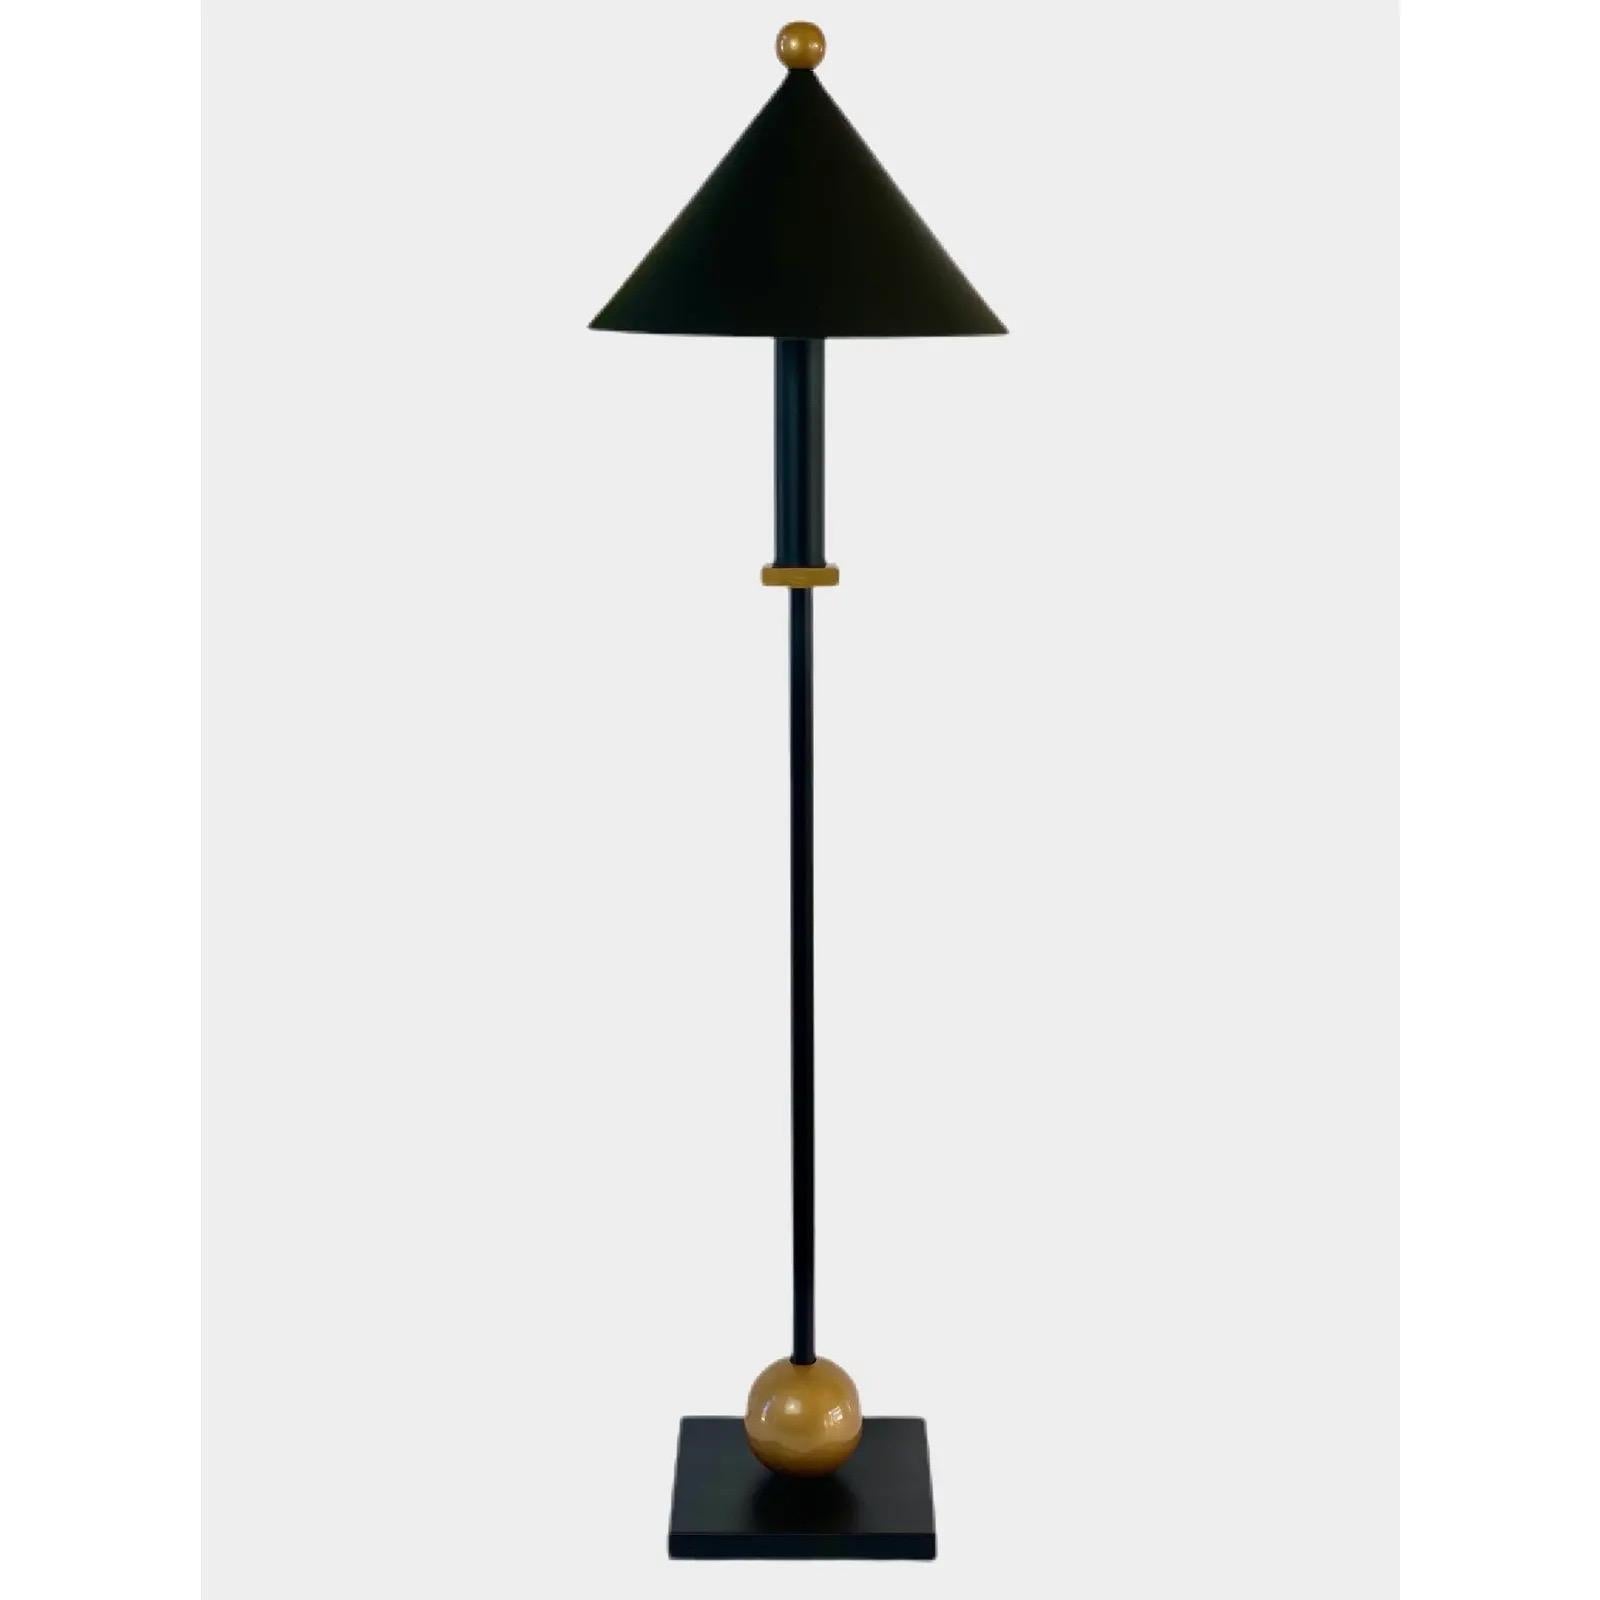 We are very pleased to offer a sculptural, Memphis style table lamp by the recognizable designer Robert Sonneman for George Kovacs, circa the 1990s. Made of a black satin powder coated metal body and warm gold details. With its clean lines and